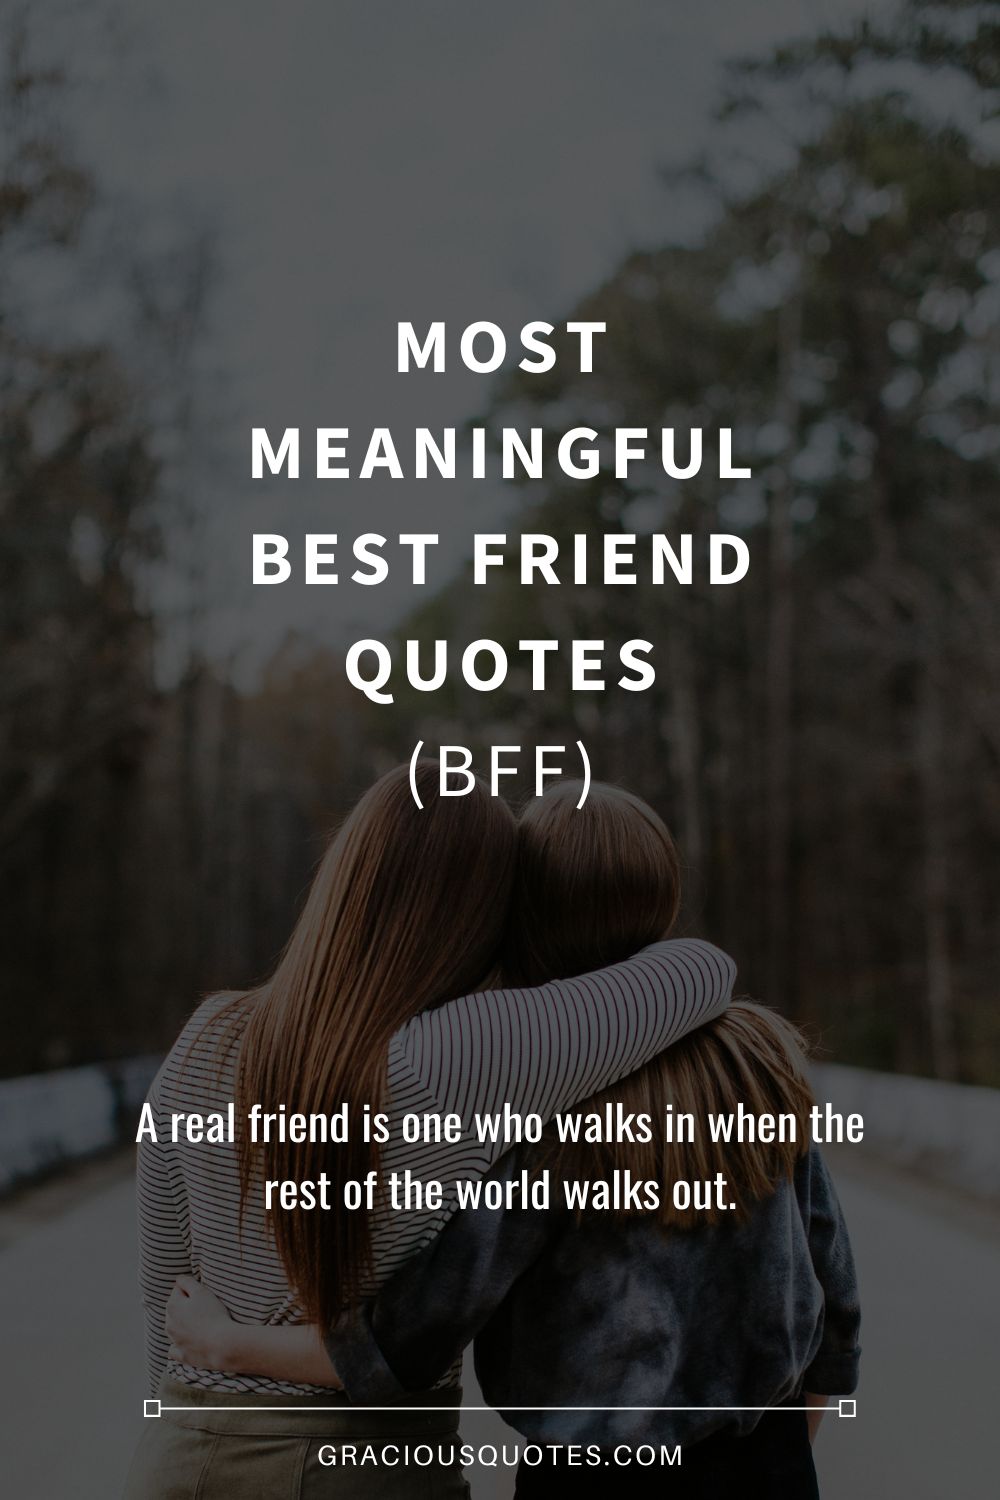 real friends quote